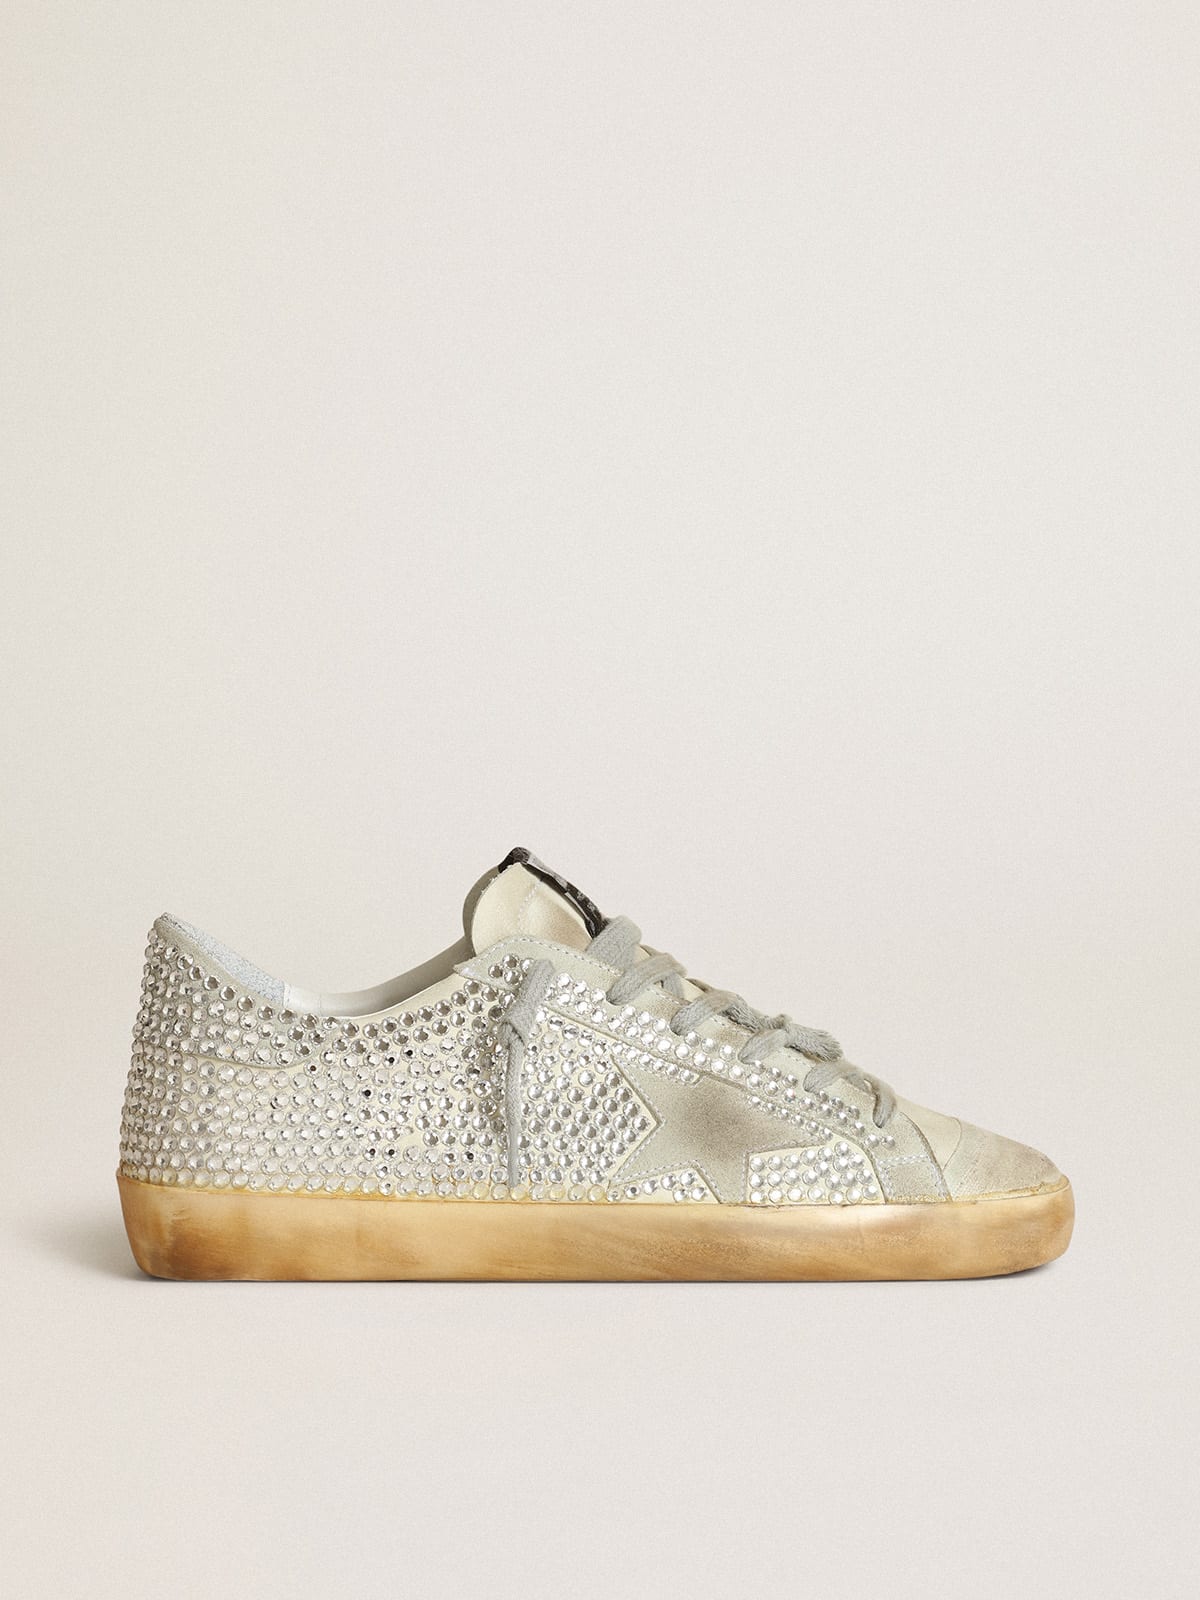 Super-star sneakers in off-white nubuck and silver crystals with ice-gray suede star